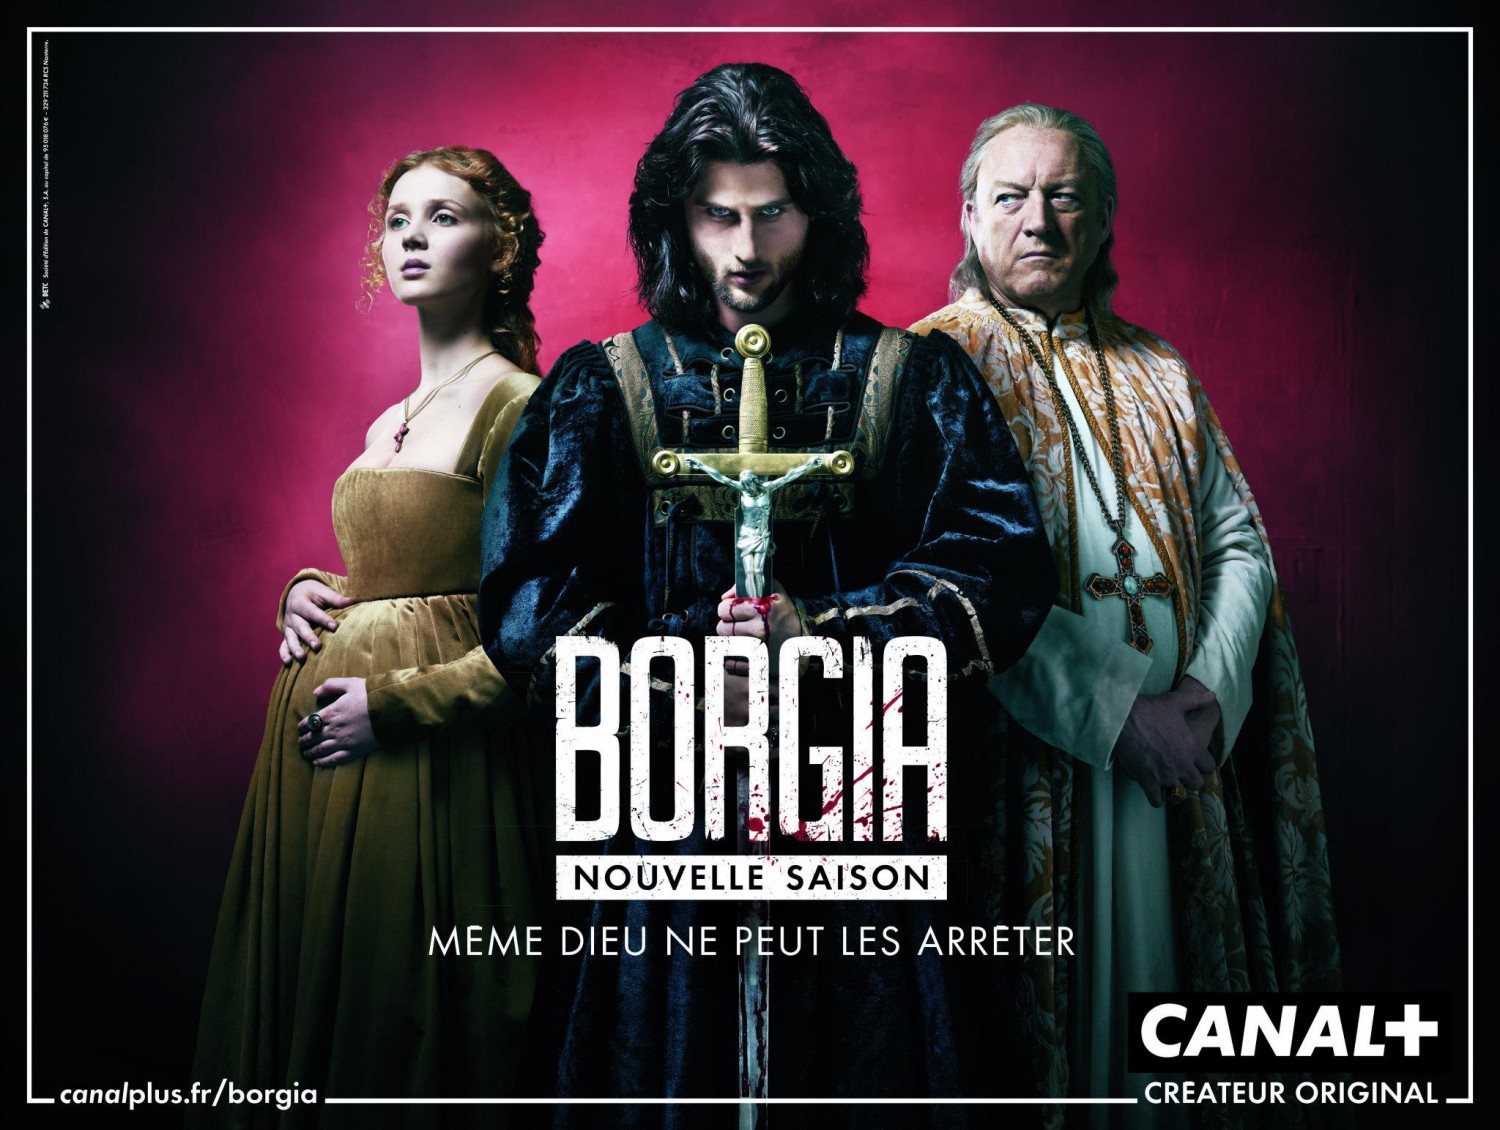 Extra Large TV Poster Image for Borgia (#4 of 5)